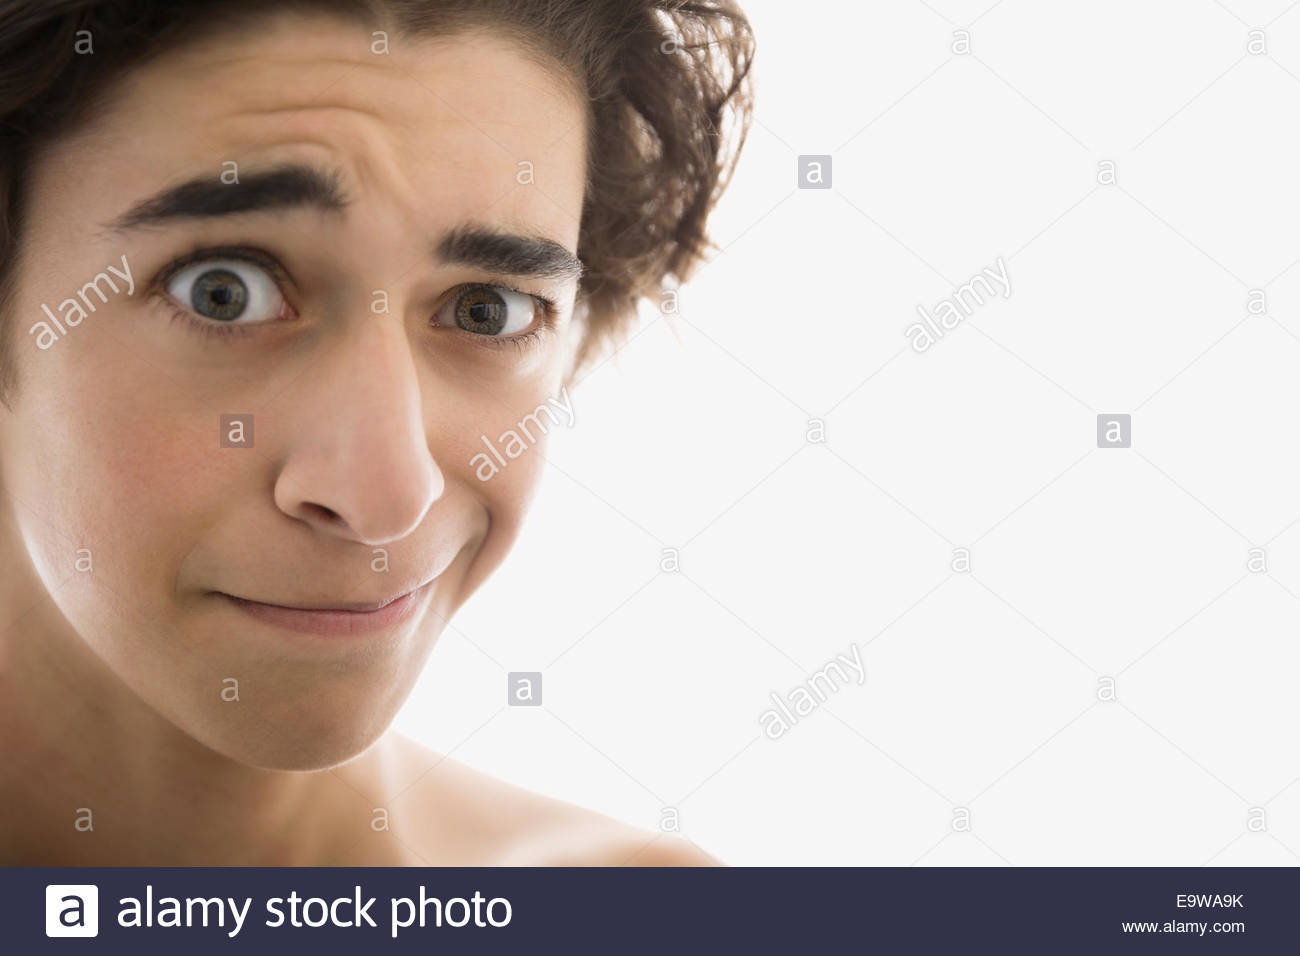 Close up of young man making a face Stock Photo